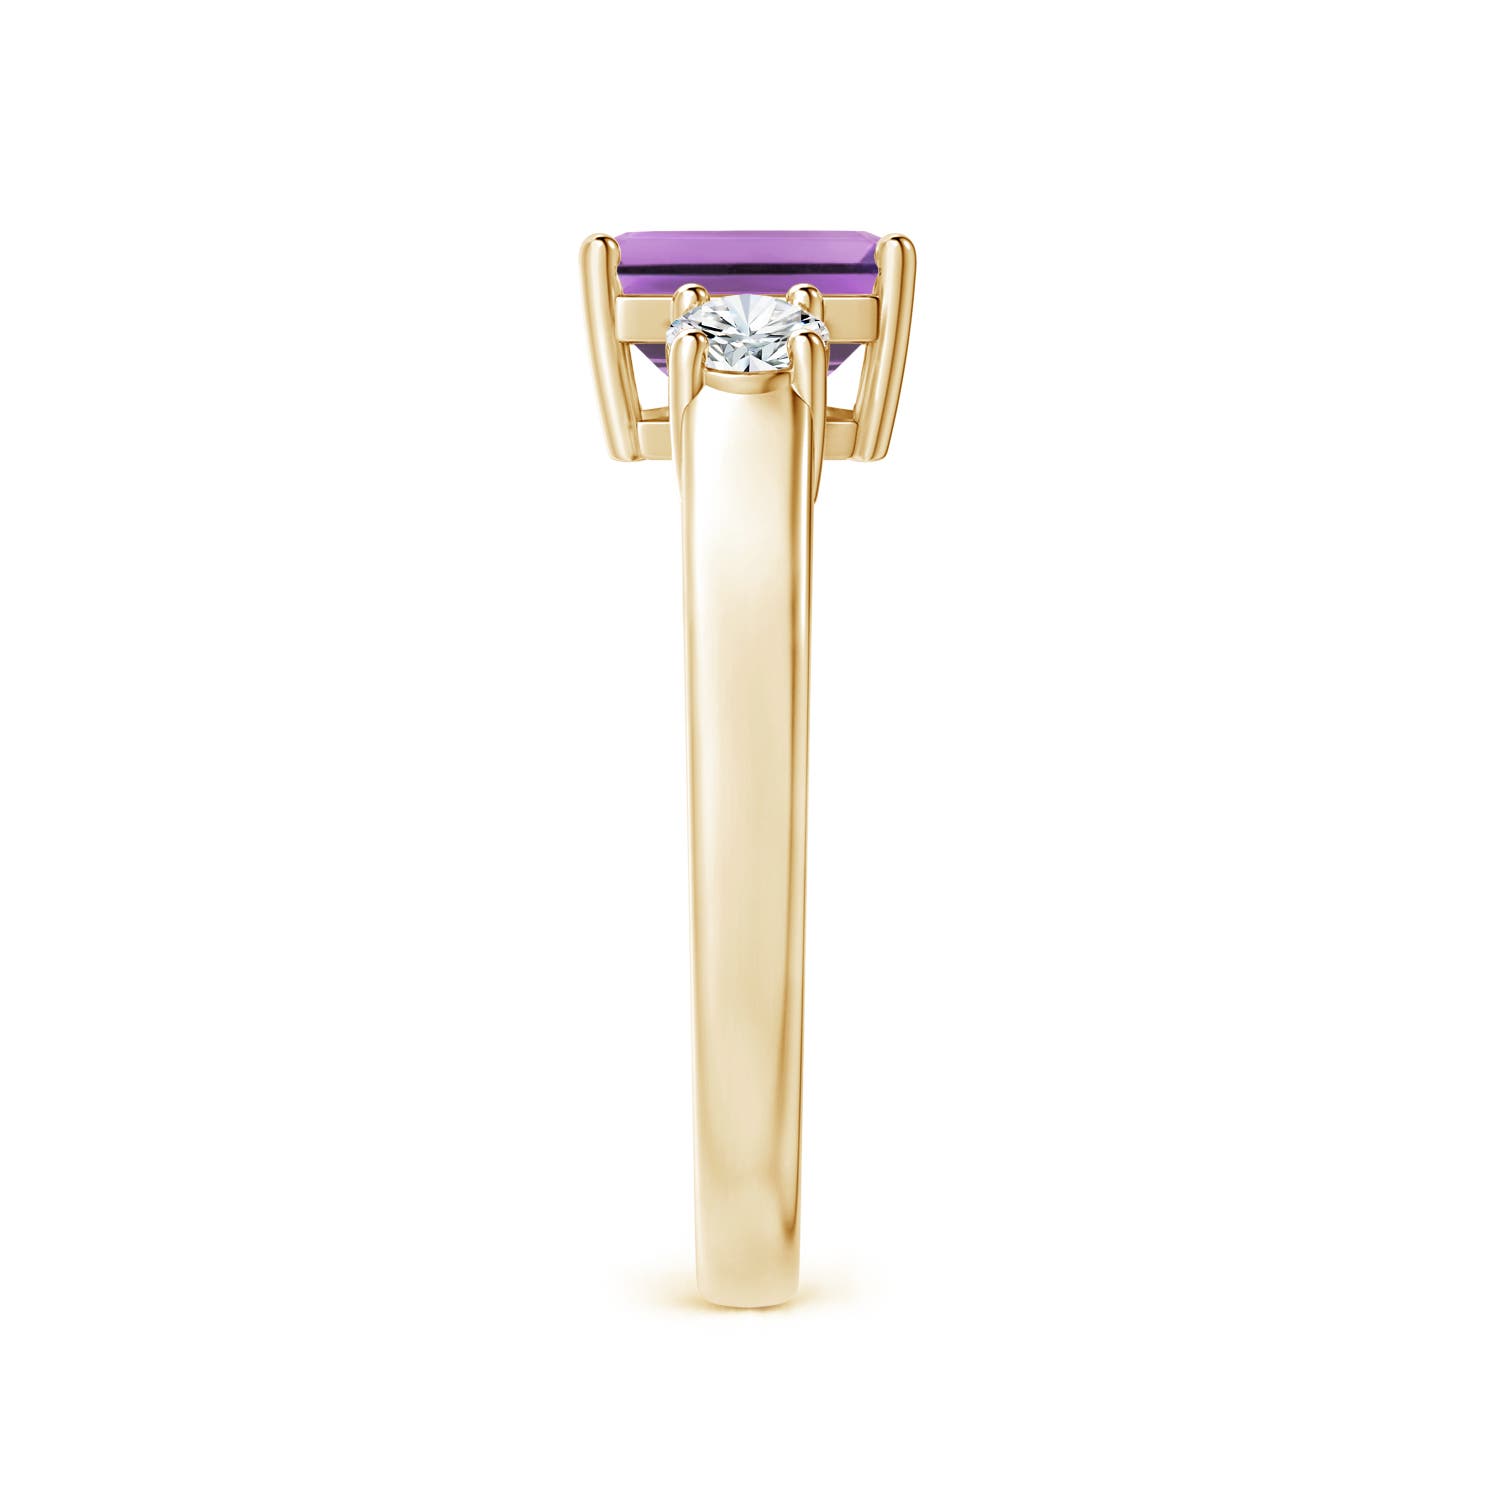 A - Amethyst / 1.62 CT / 14 KT Yellow Gold